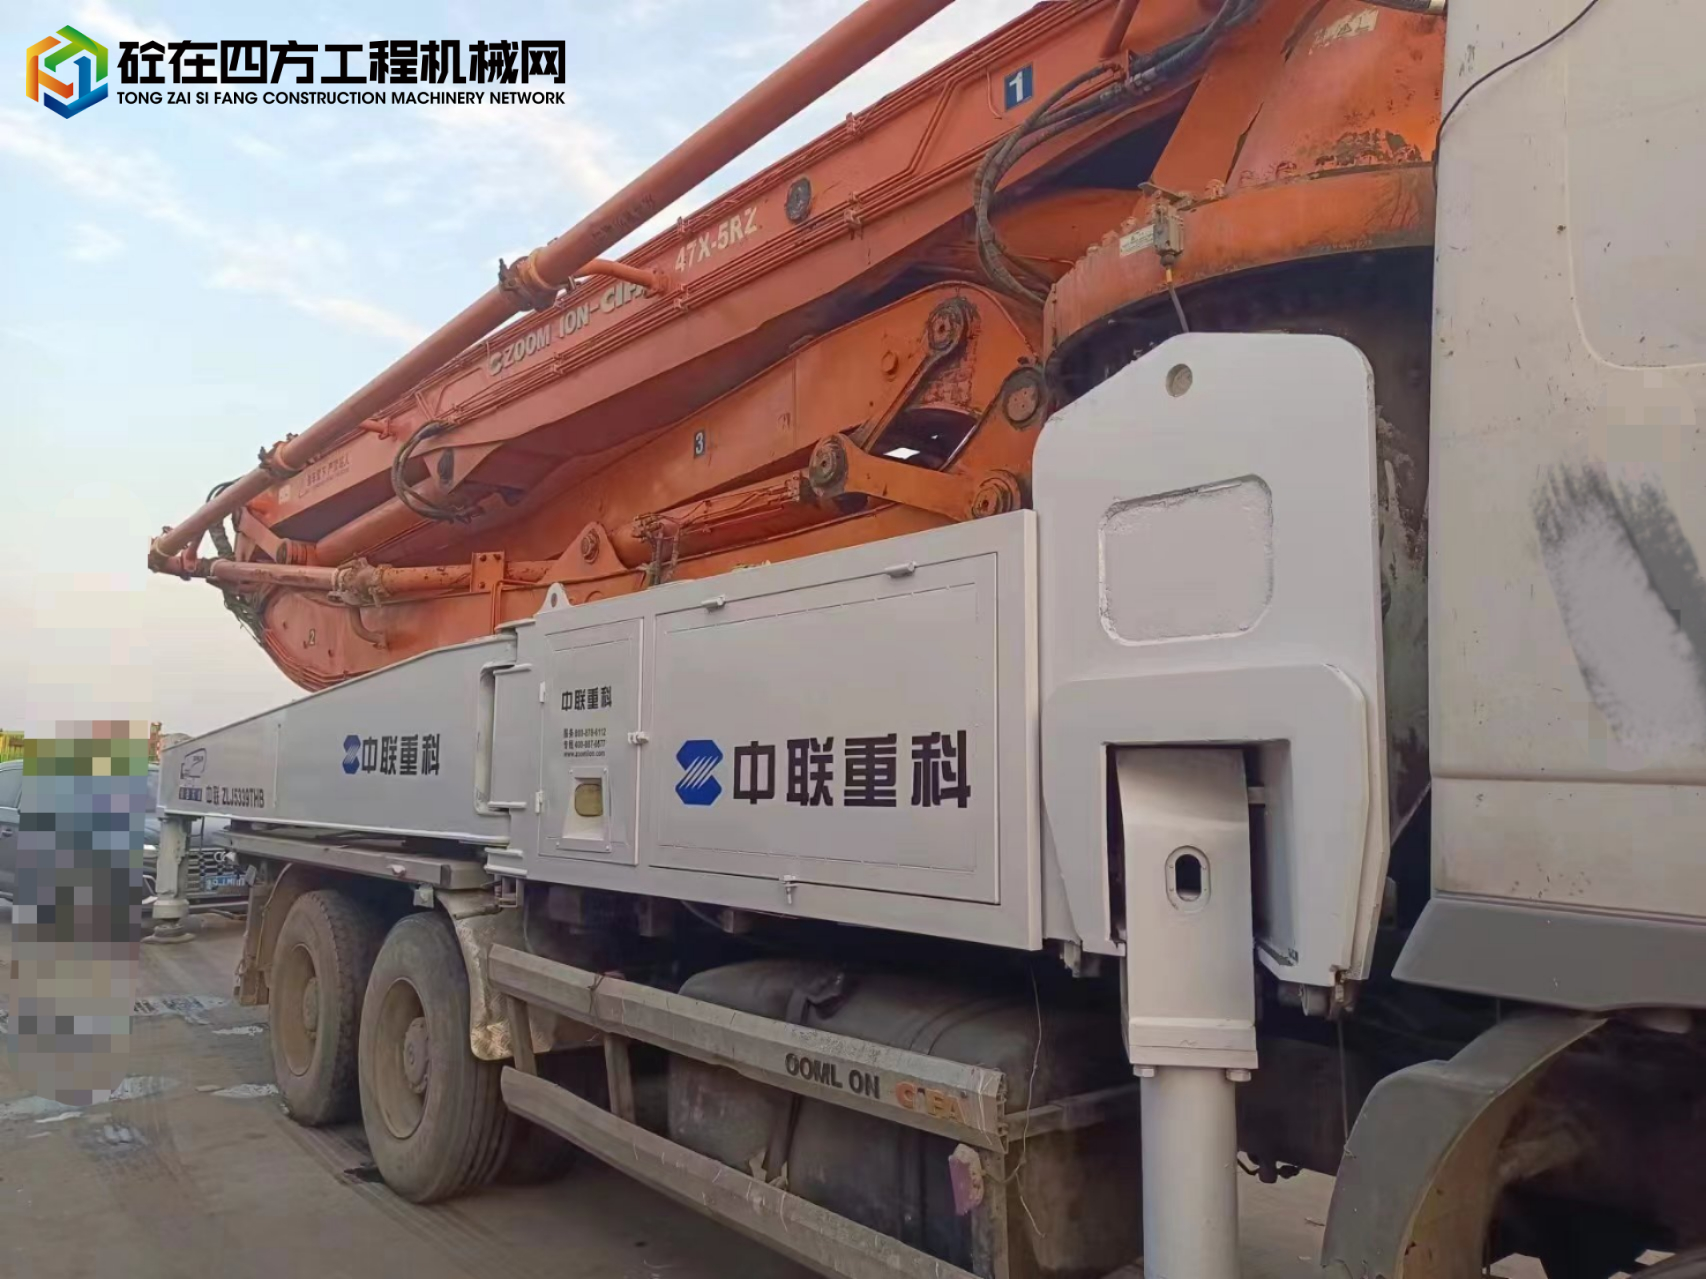 https://images.tongzsf.com/tong/truck_machine/20240618/16670d80abe29f.jpg